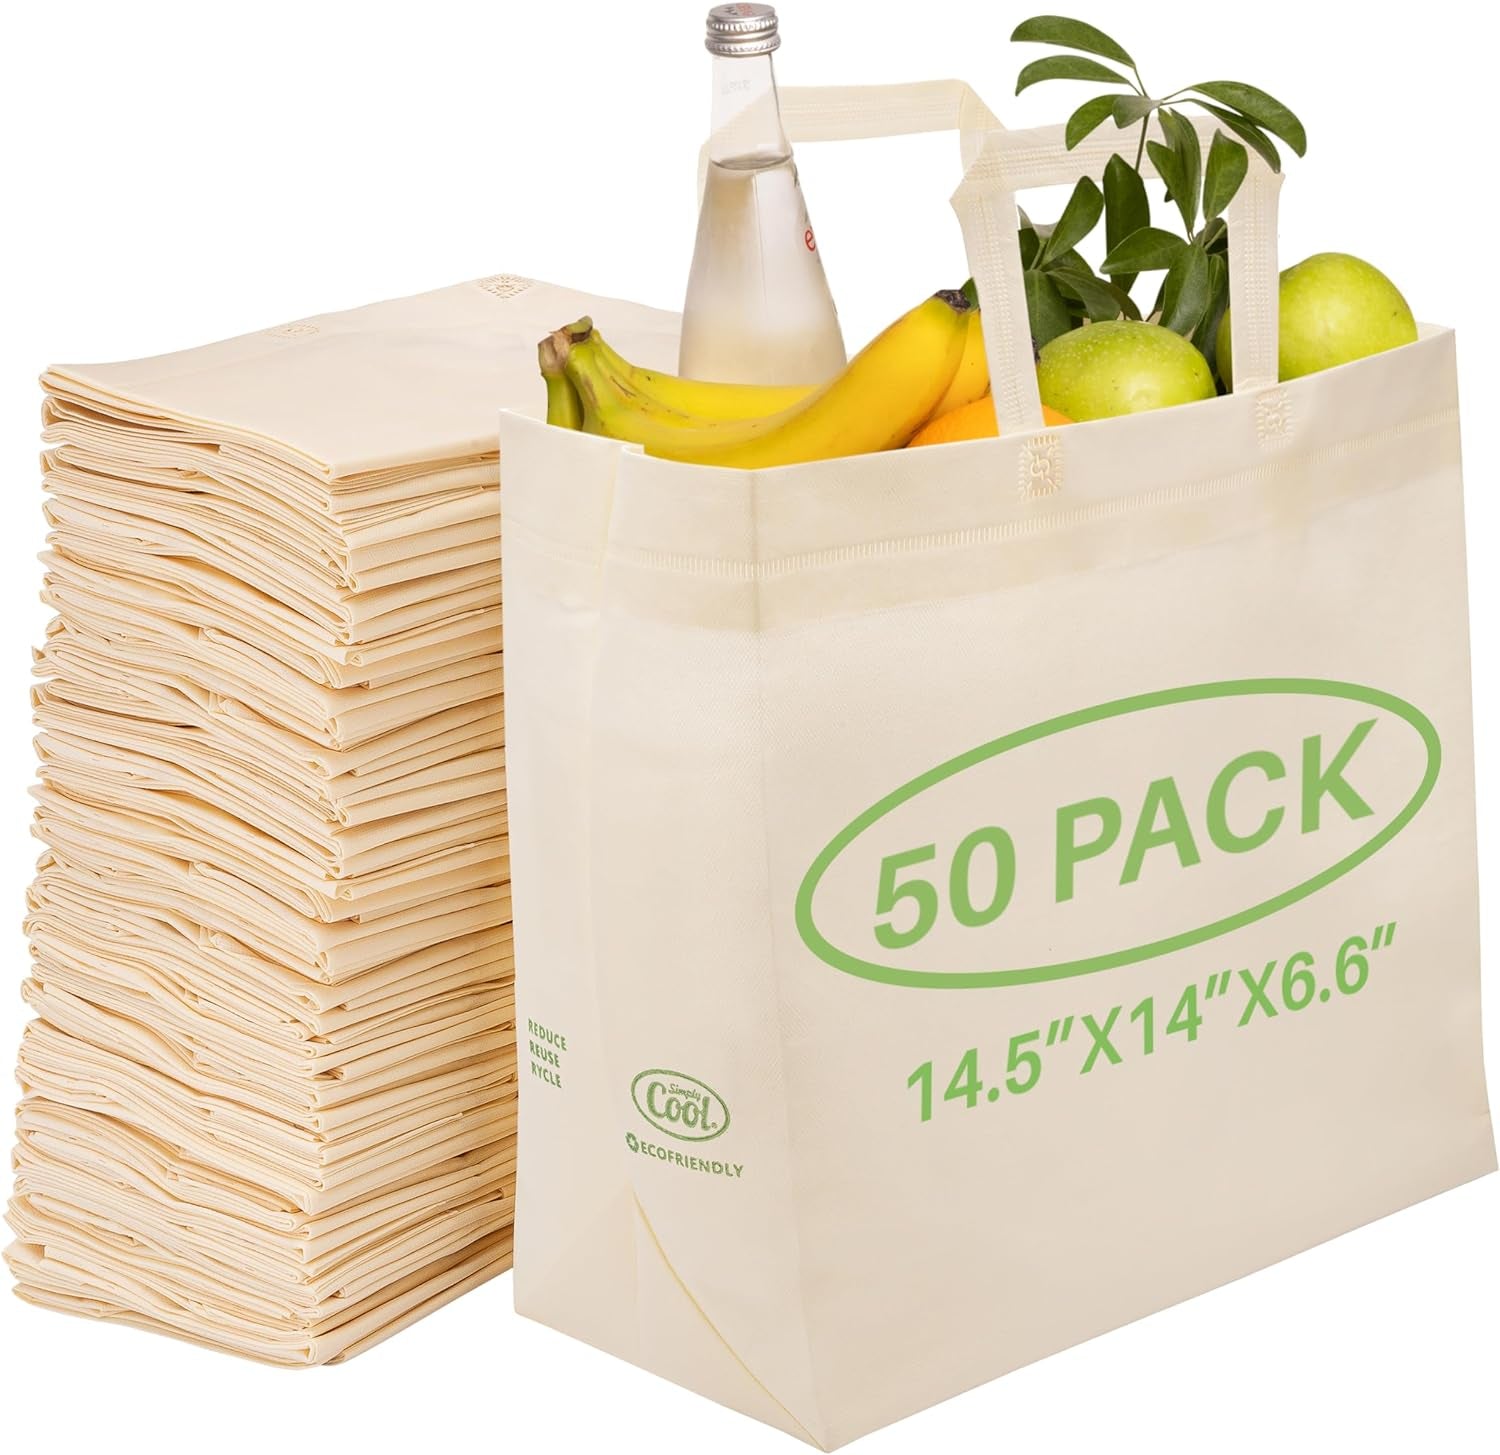 Reusable Grocery Bags Eco-Friendly - Large Reusable Shopping Bags, Heavy Duty Grocery Bags, 14.5"X14"X6.6" Foldable, Tote Bags Bulk (50 Pack, Cream)